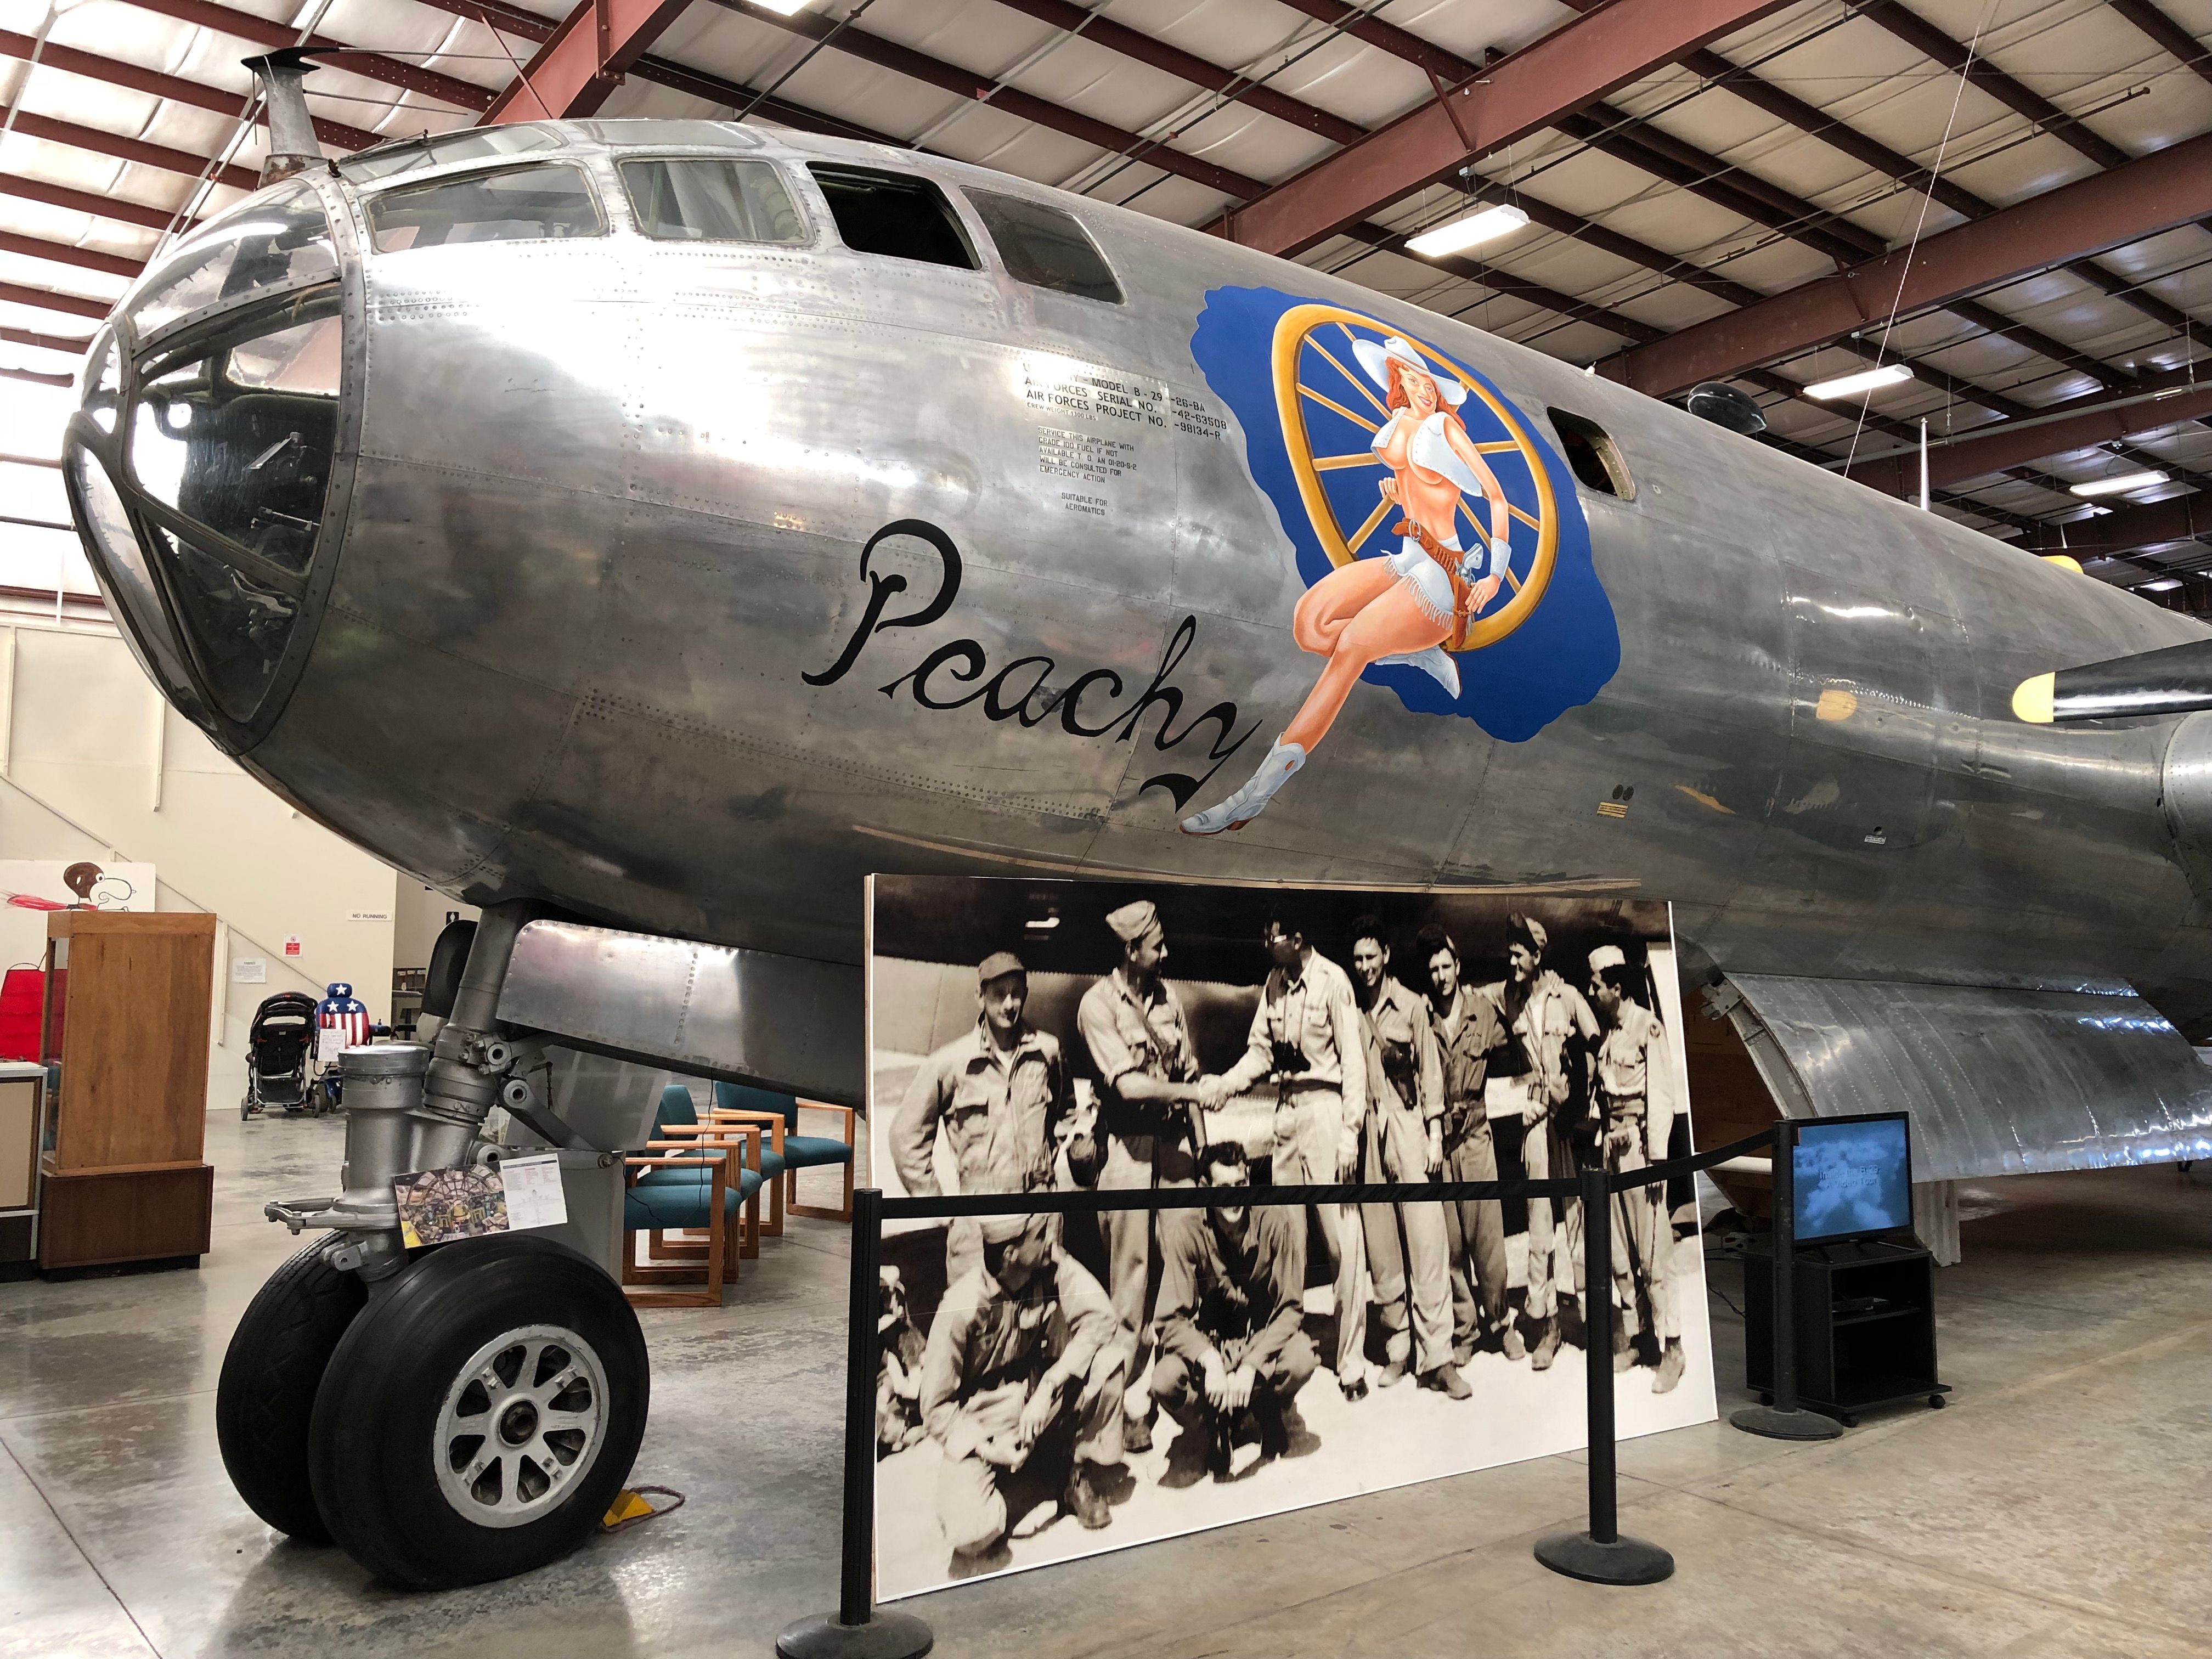 Boeing_B-29_Superfortress_Peachy